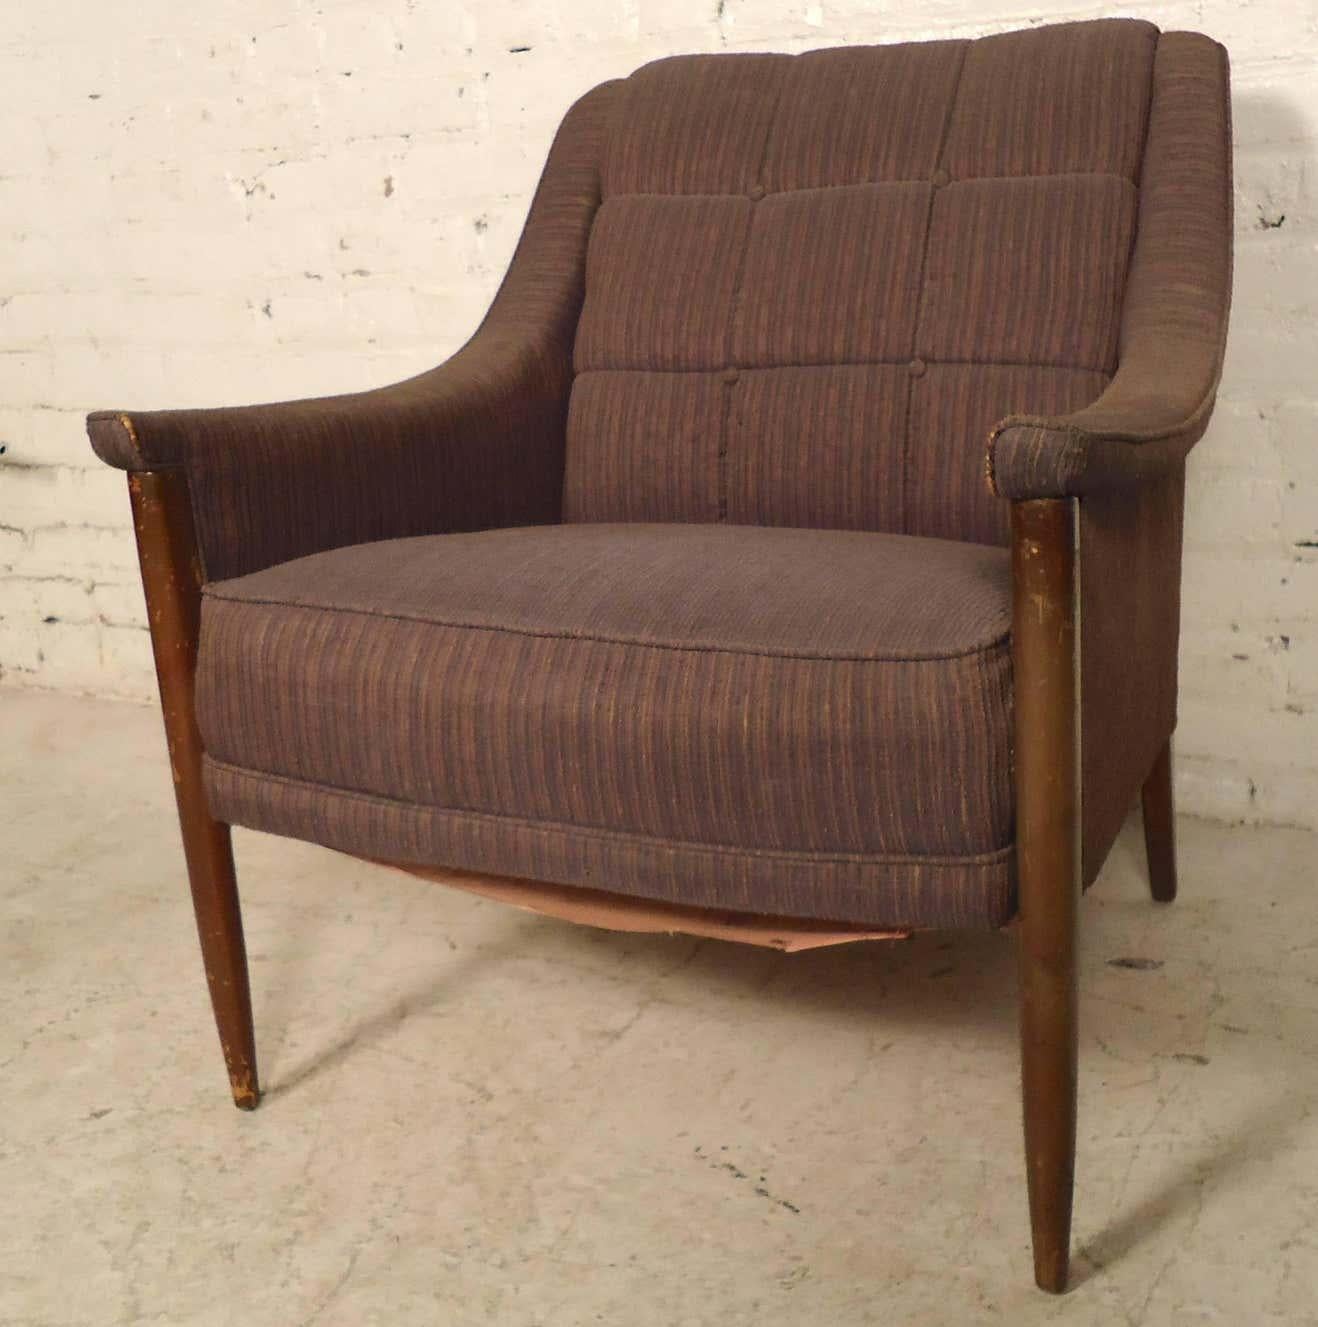 Vintage lounge chair with dramatic swooping arms and tapered wood legs. Great comfort and design by Kroehler.

(Please confirm item location NY or NJ with dealer).
  